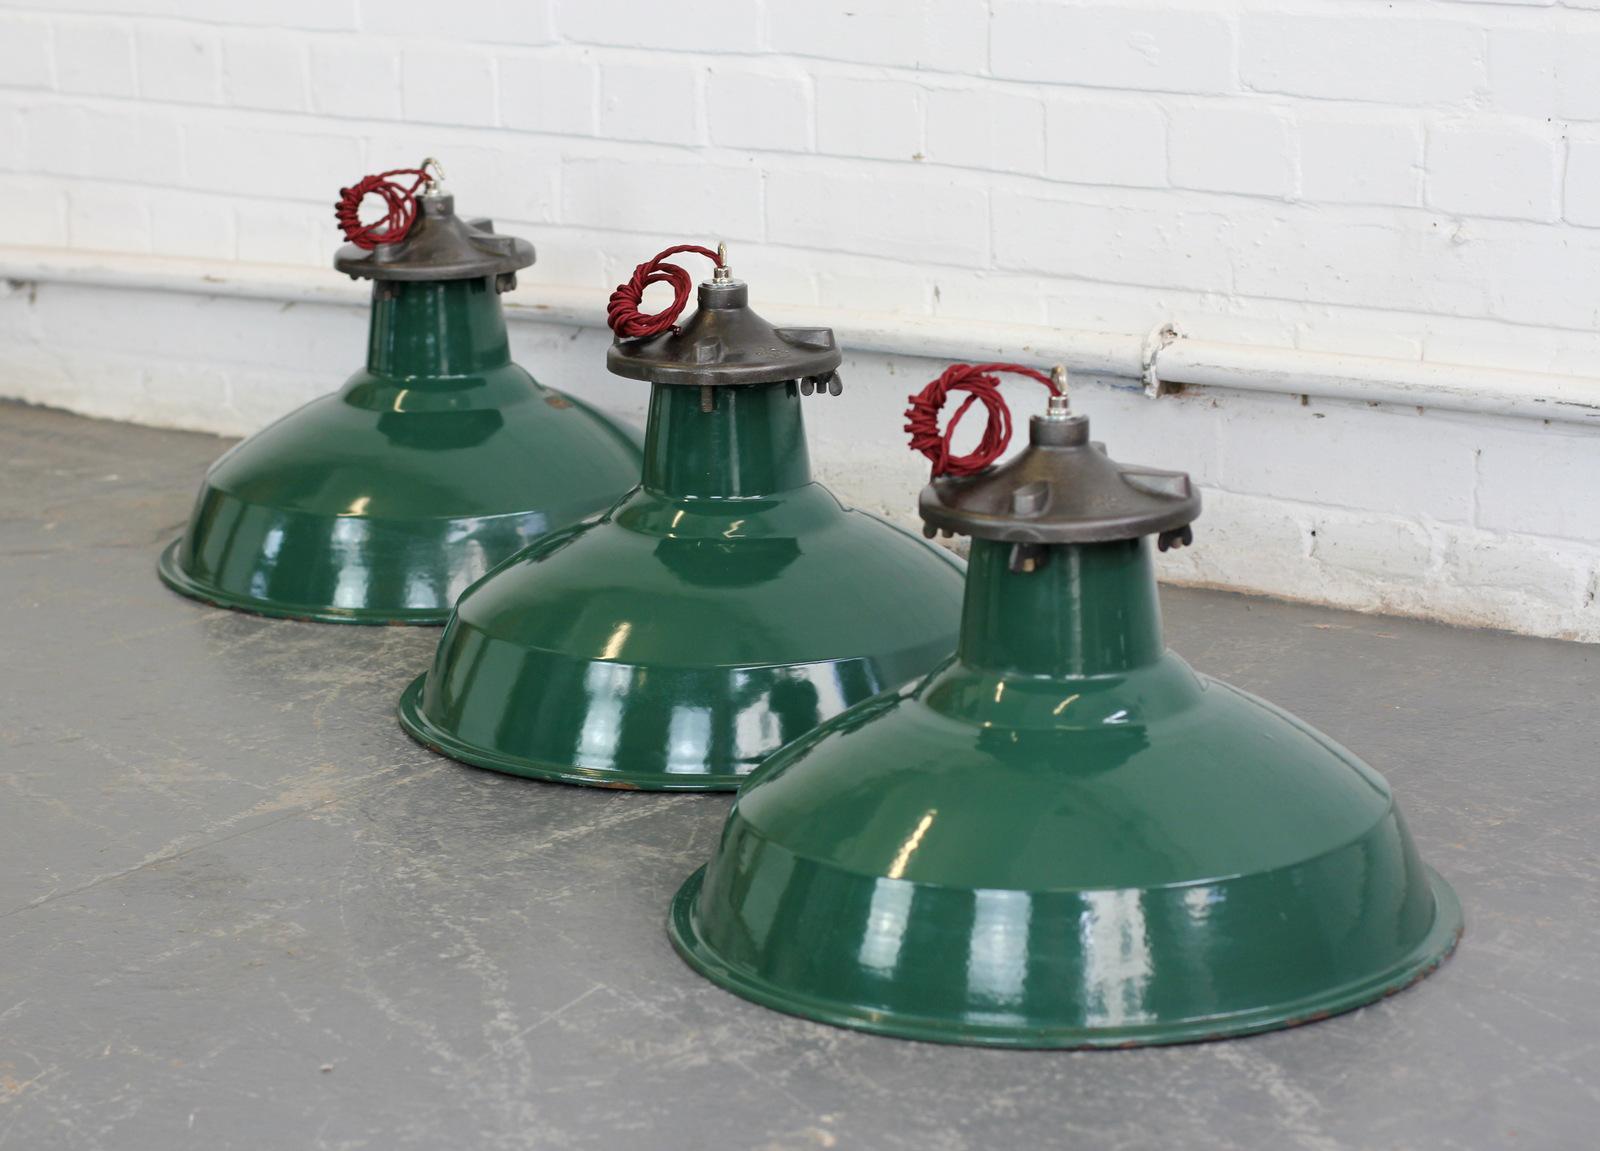 Munitions Factory Lights by Simplex, circa 1940s

- Price is per light (16 available)
- Vitreous green enamel
- White enamel inner reflectors
- Cast iron tops with embossed makers logo
- Comes with 100cm of red braided cable
- Comes with